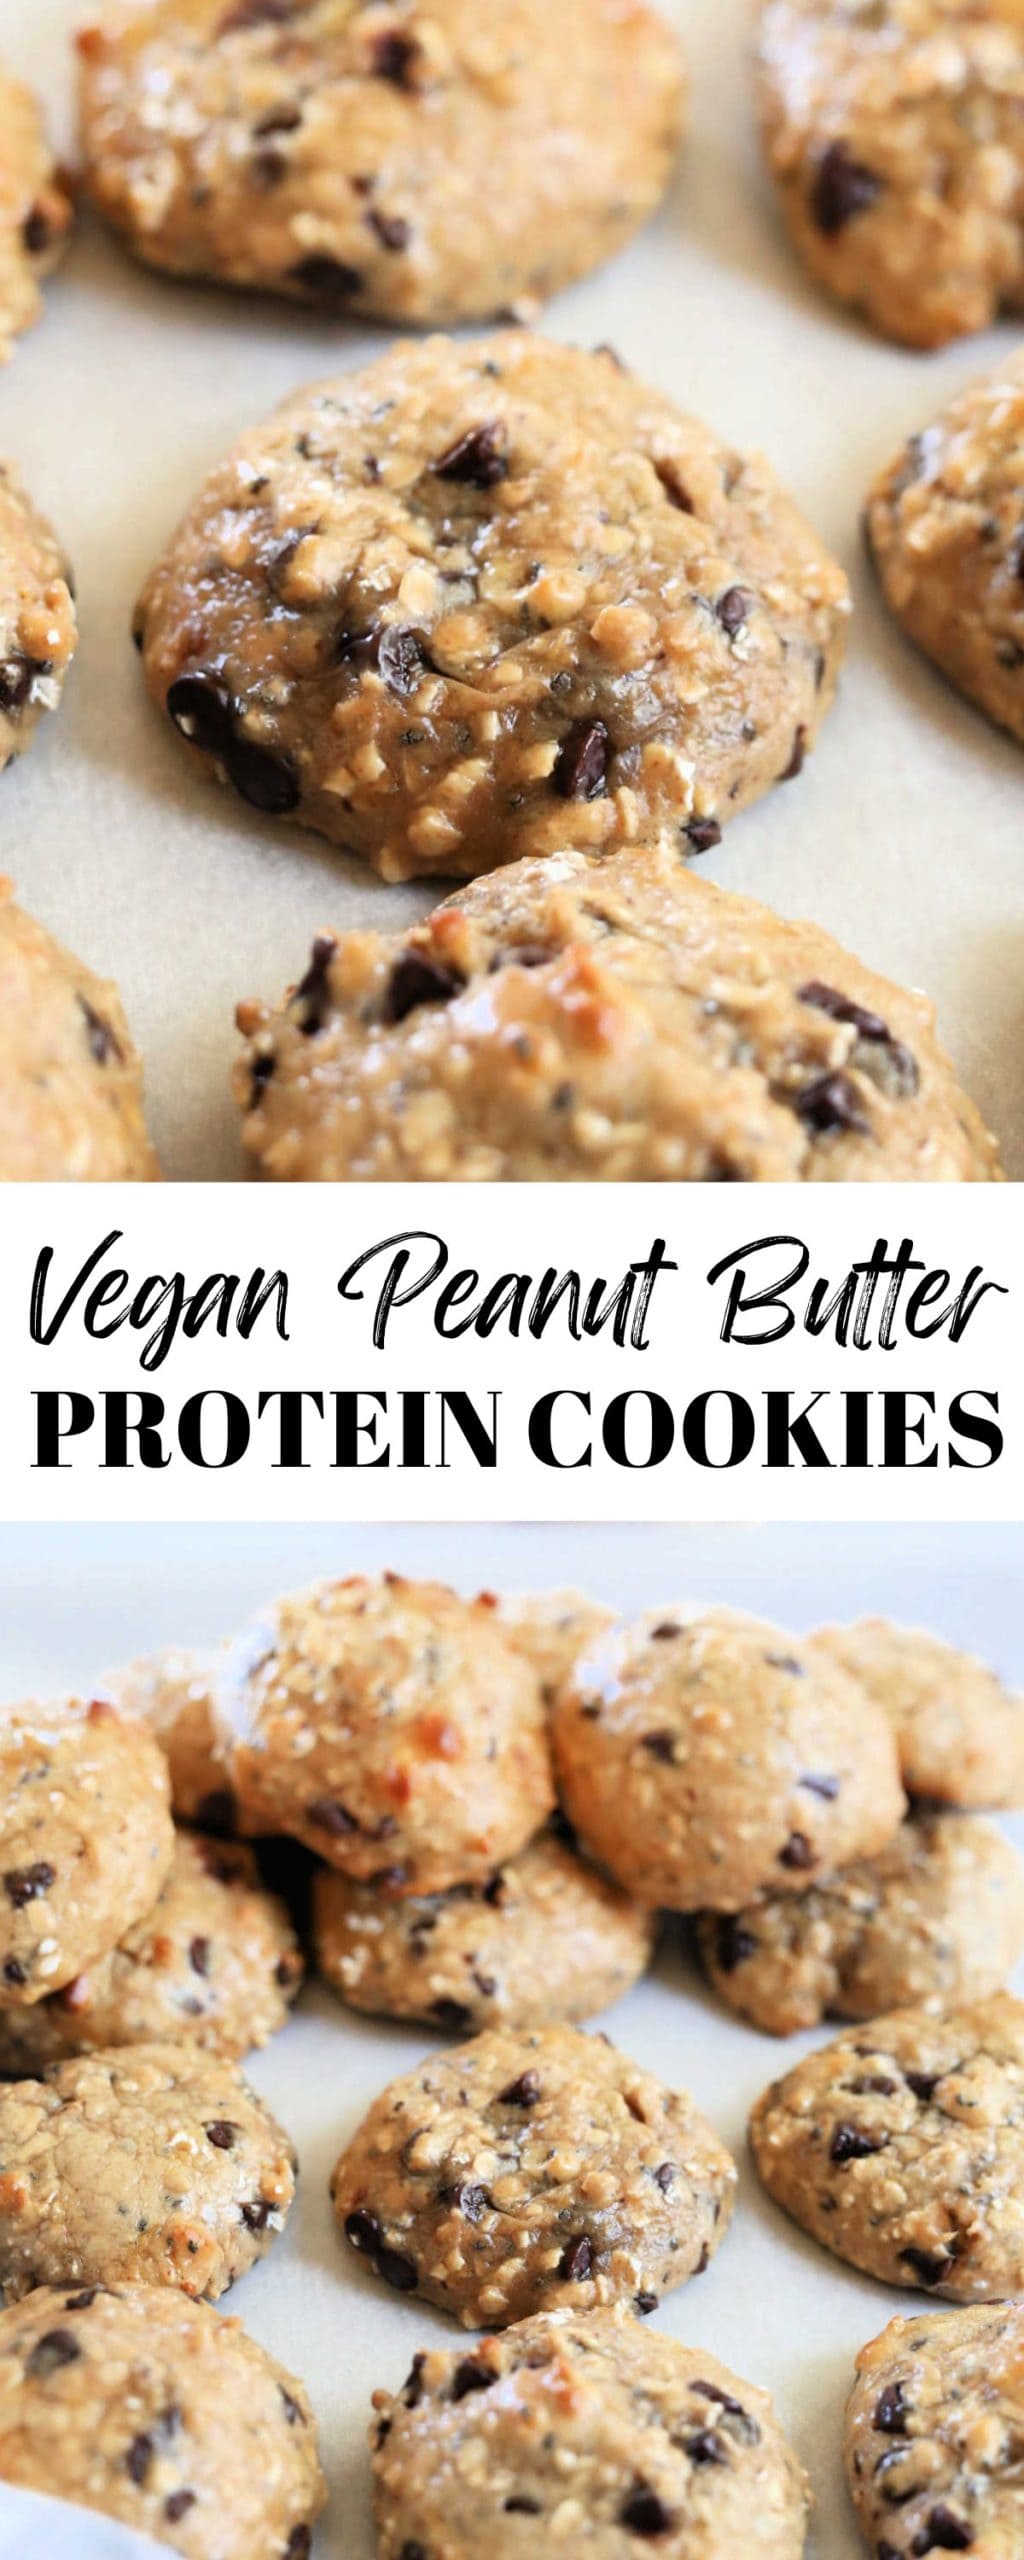 peanut butter protein cookies recipe